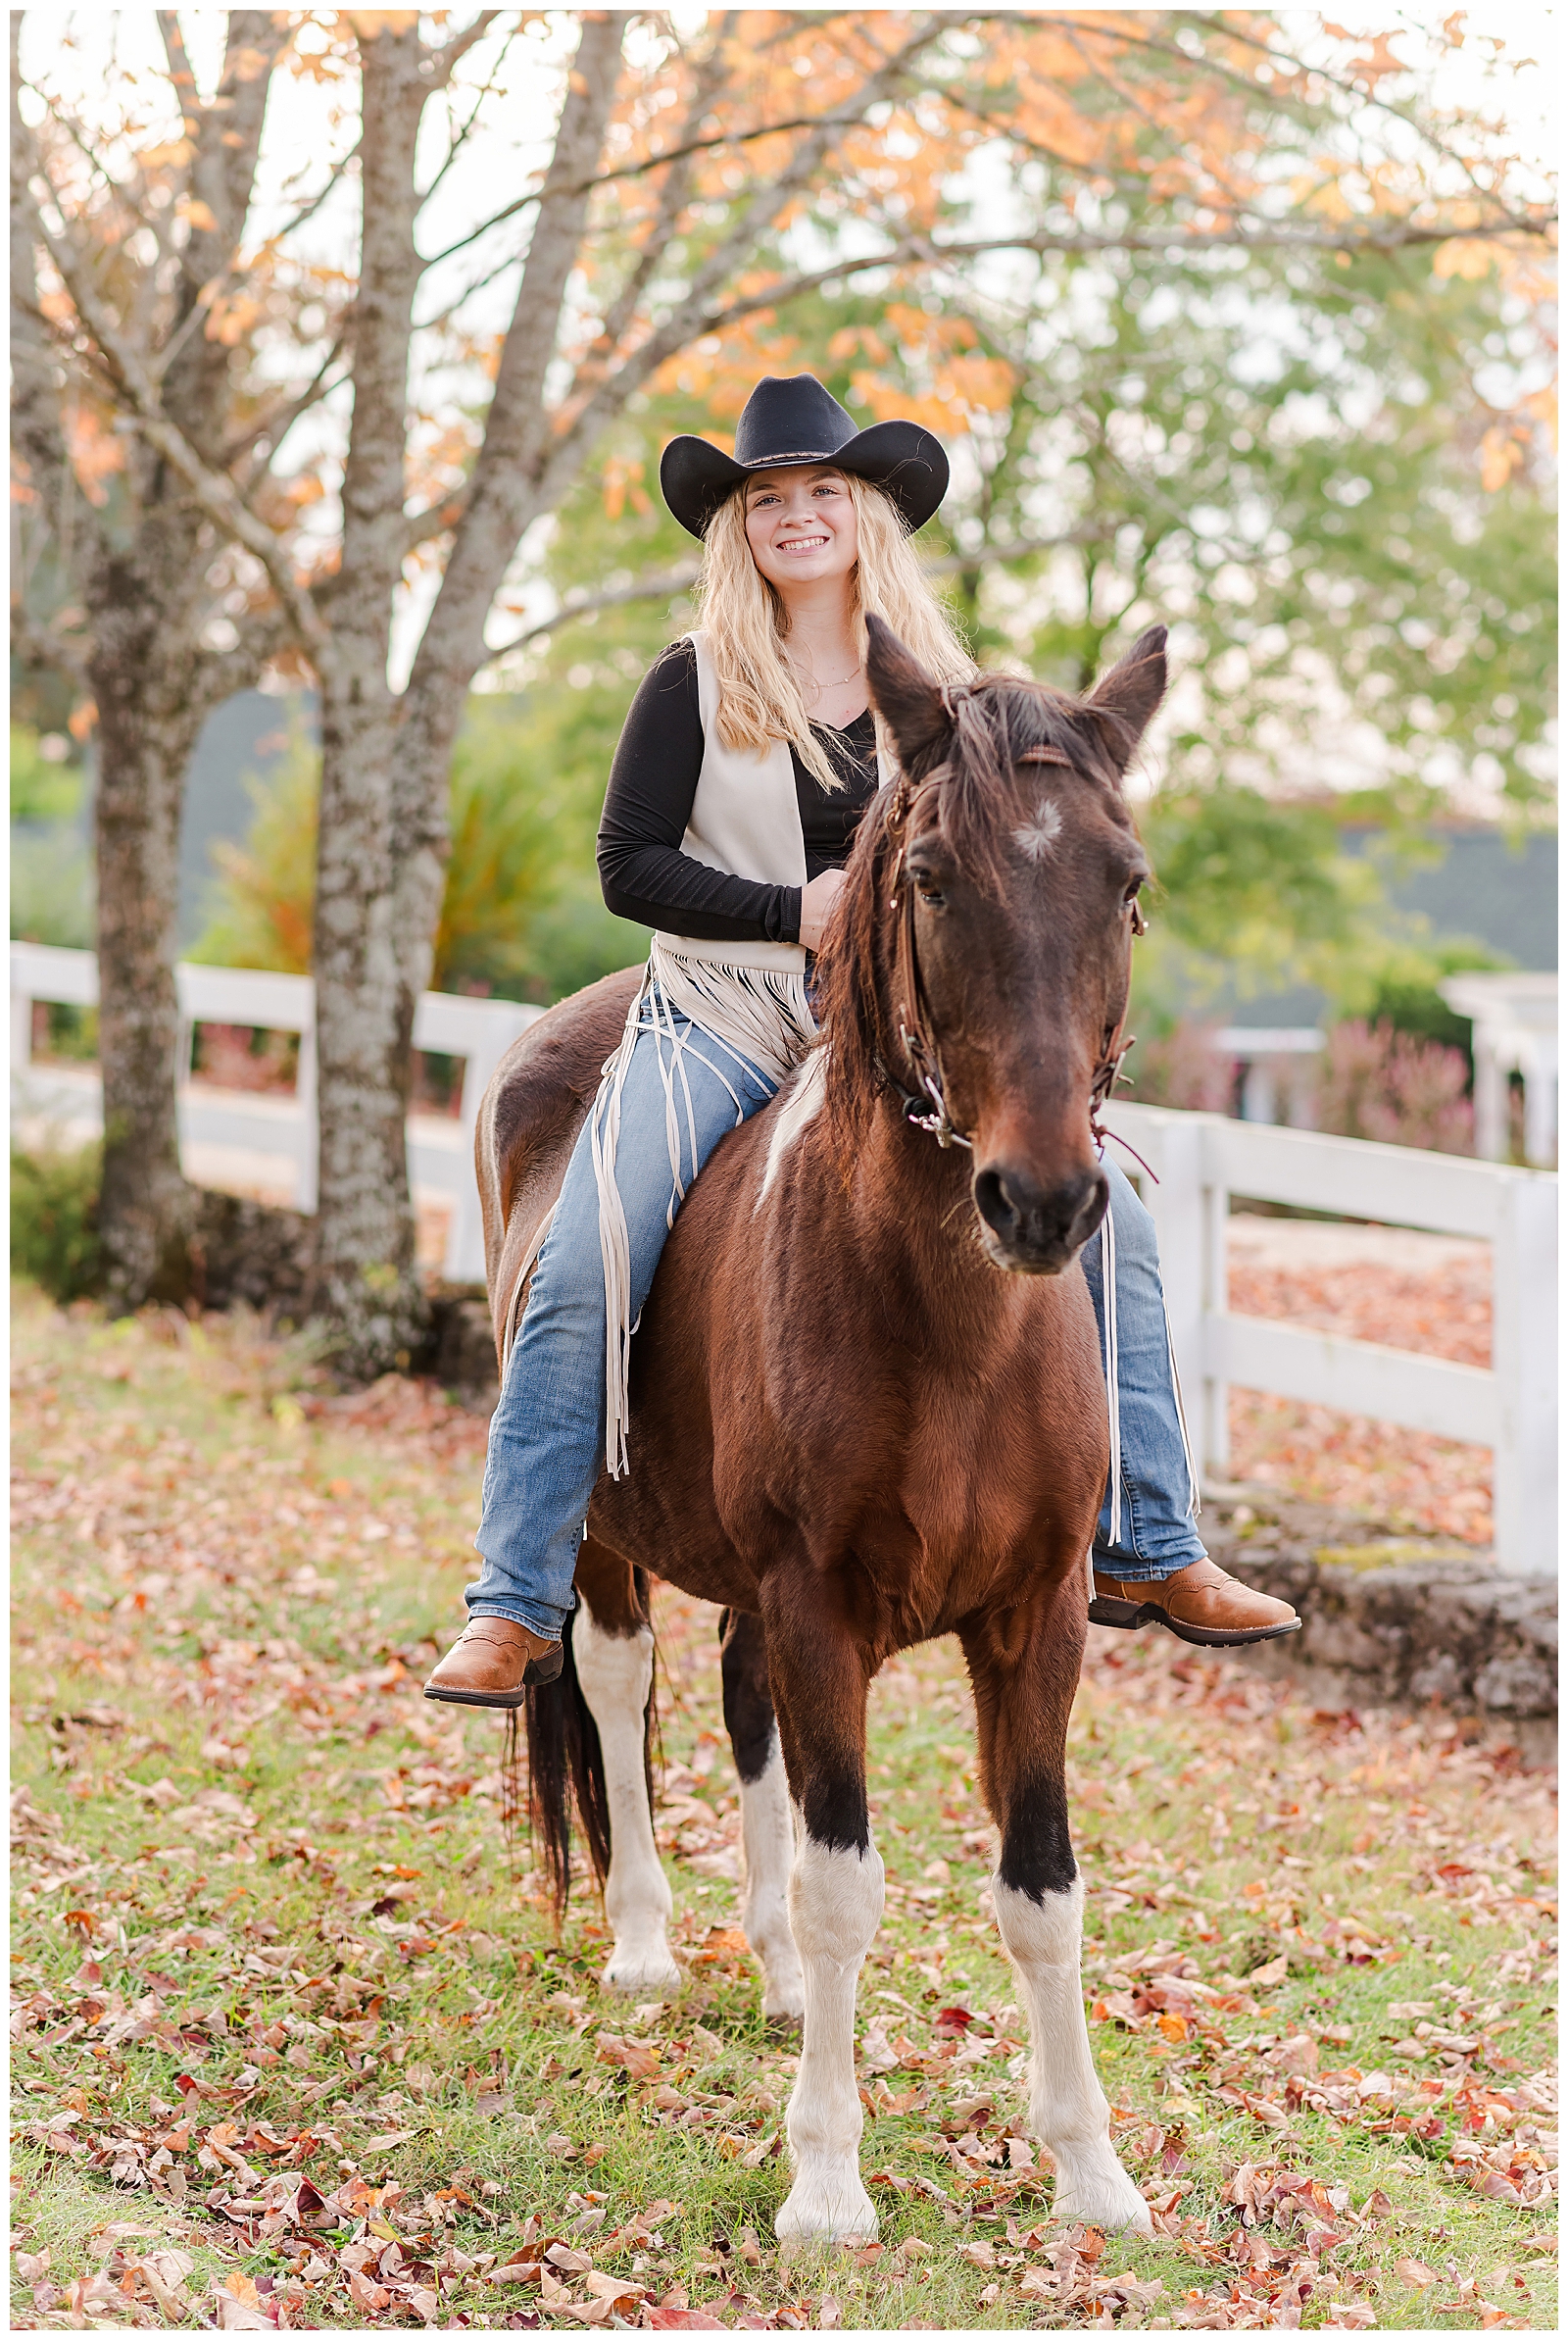 Nashville girl wearing a black cowgirl hat, riding a horse during her Equine Senior Session.